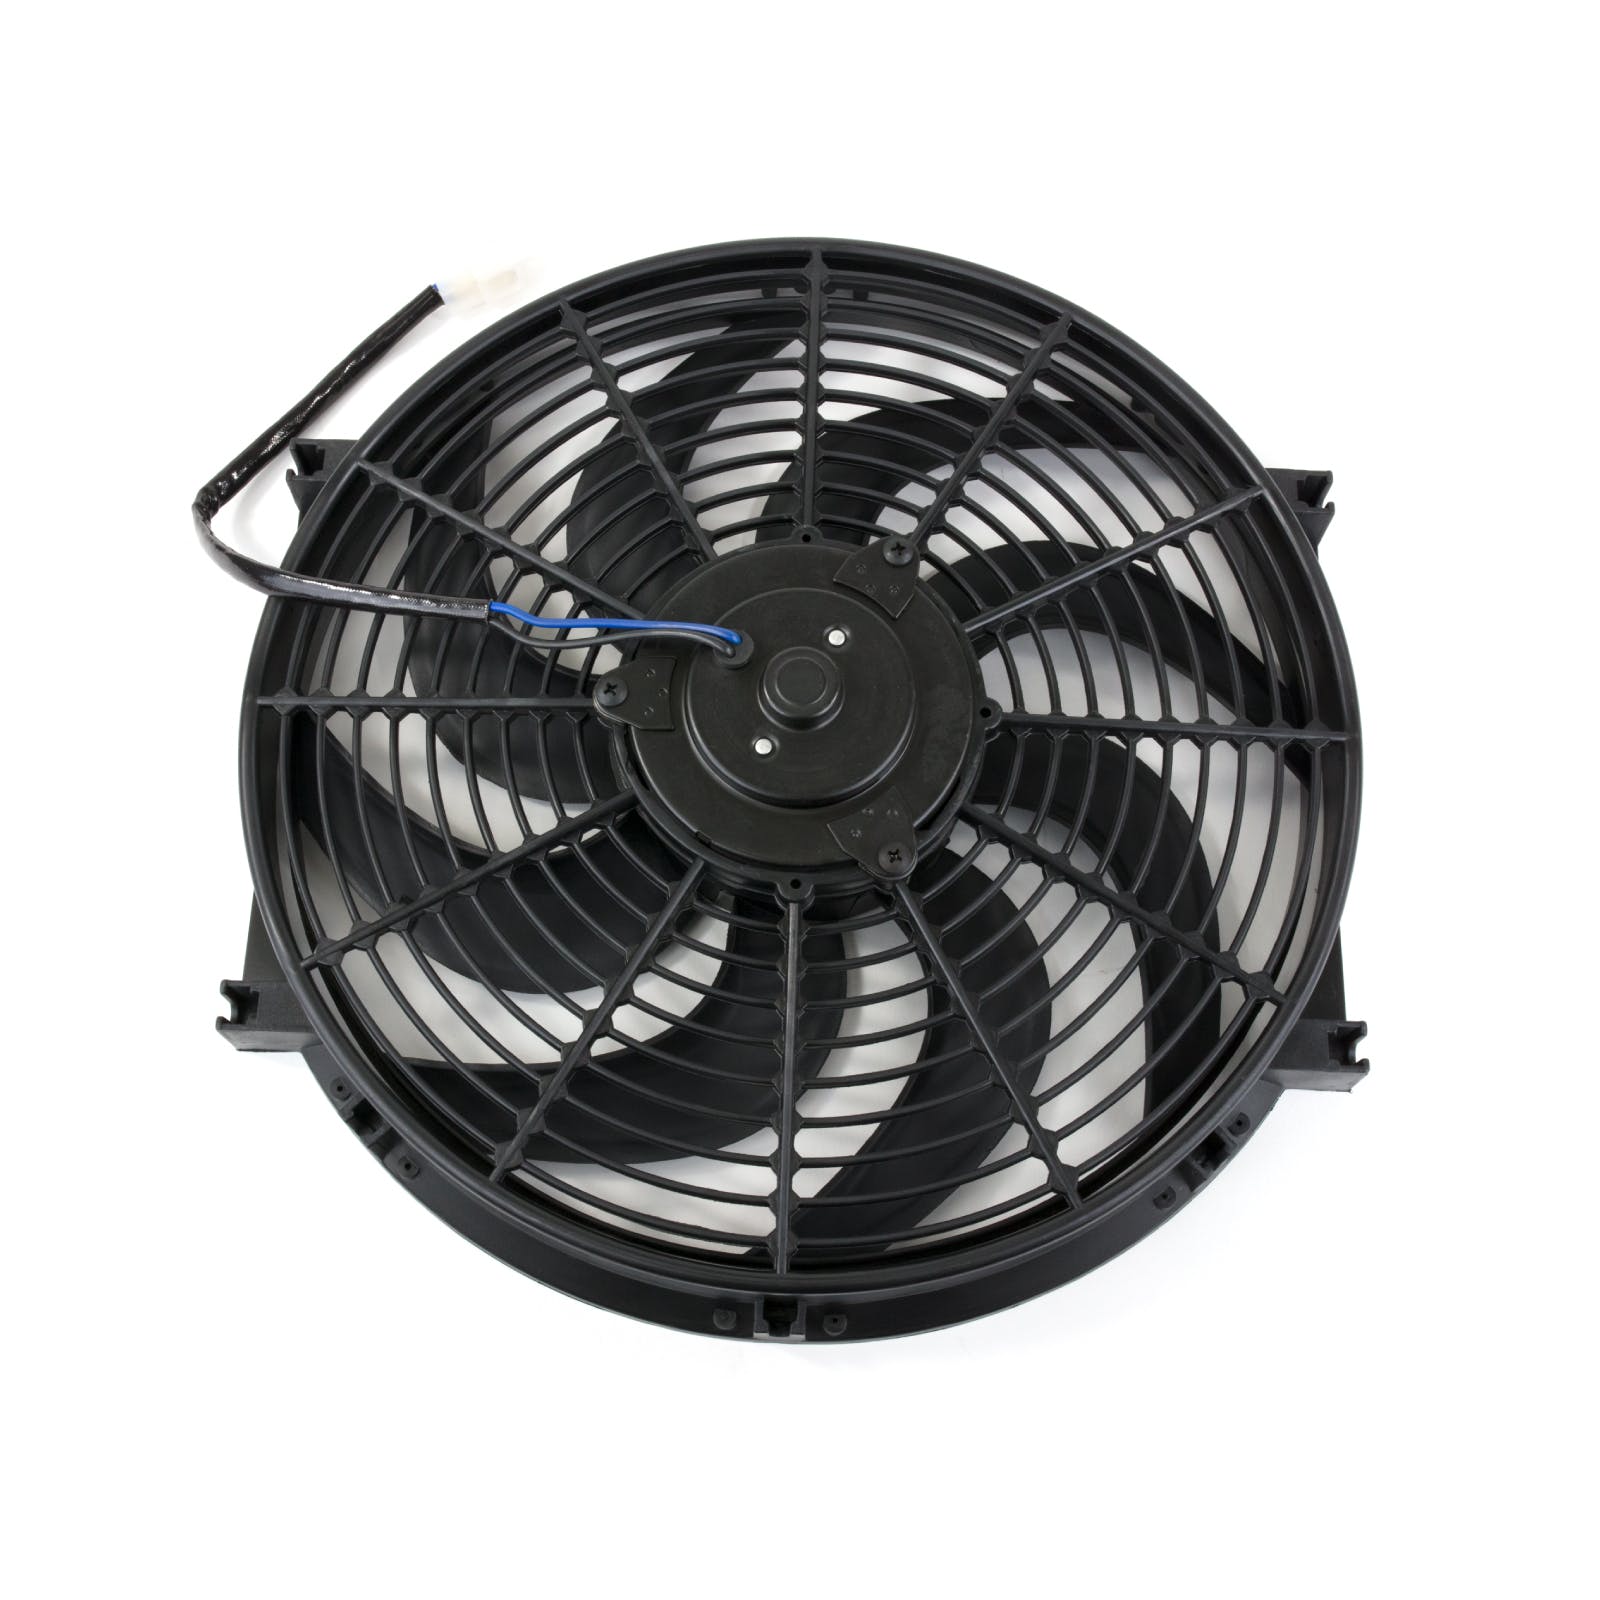 Top Street Performance HC6104 14 inch Universal Electric Cooling Fan, S-Blade